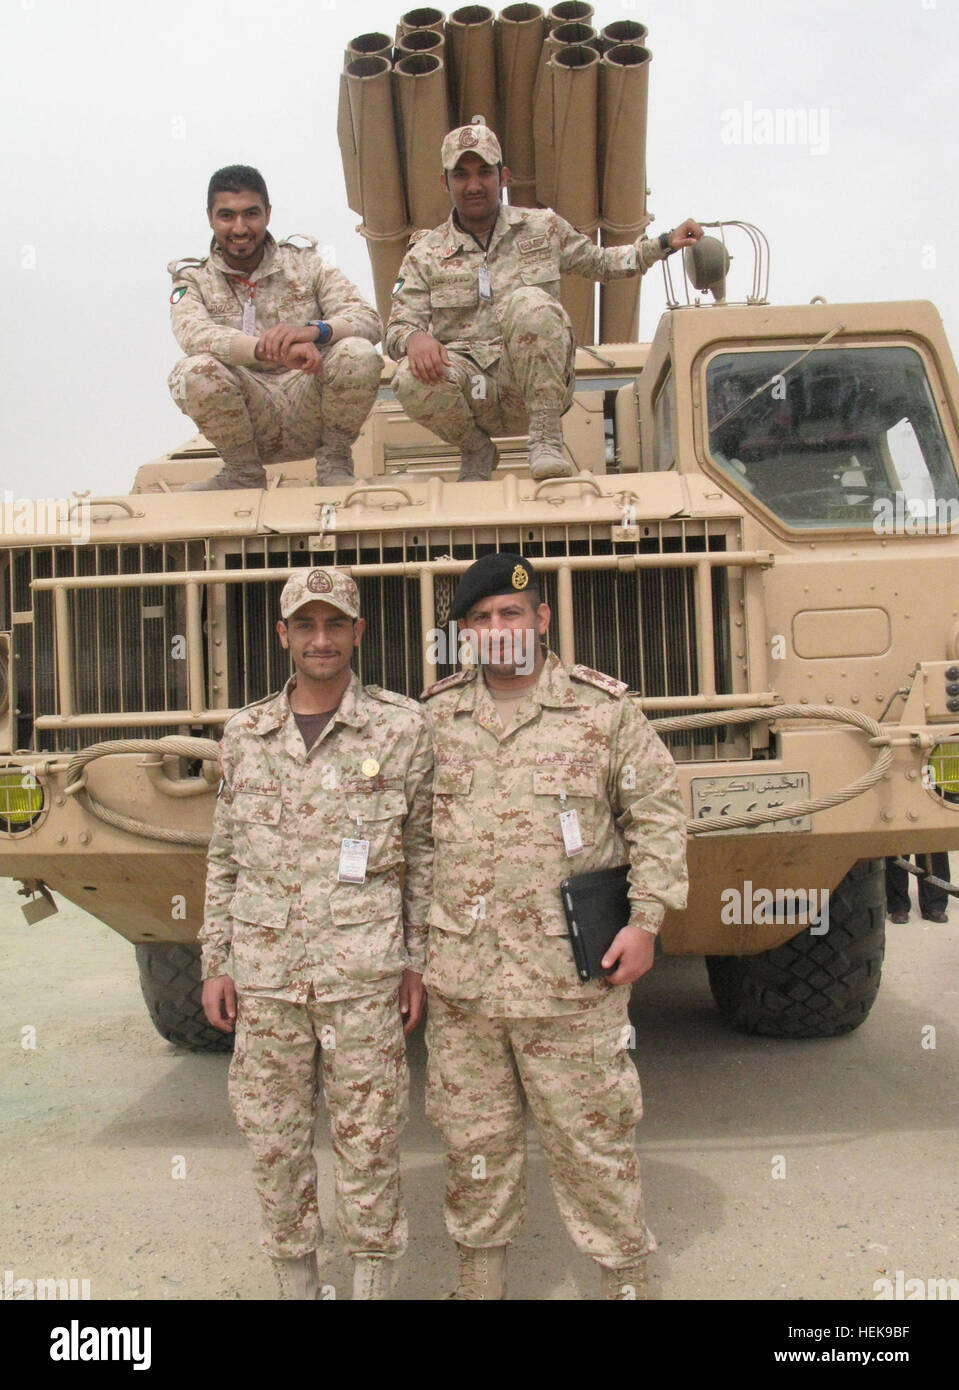 Kuwaiti army Capt. Adel Khubert, lower left, was just a 10-year-old boy when Saddam Hussein's Republic Guard invaded Kuwait. Today, he and his fellow soldiers are celebrating the 20th anniversary of their country's liberation during Operation Desert Storm, Feb. 26. Kuwaiti BM-30 Smerch Stock Photo